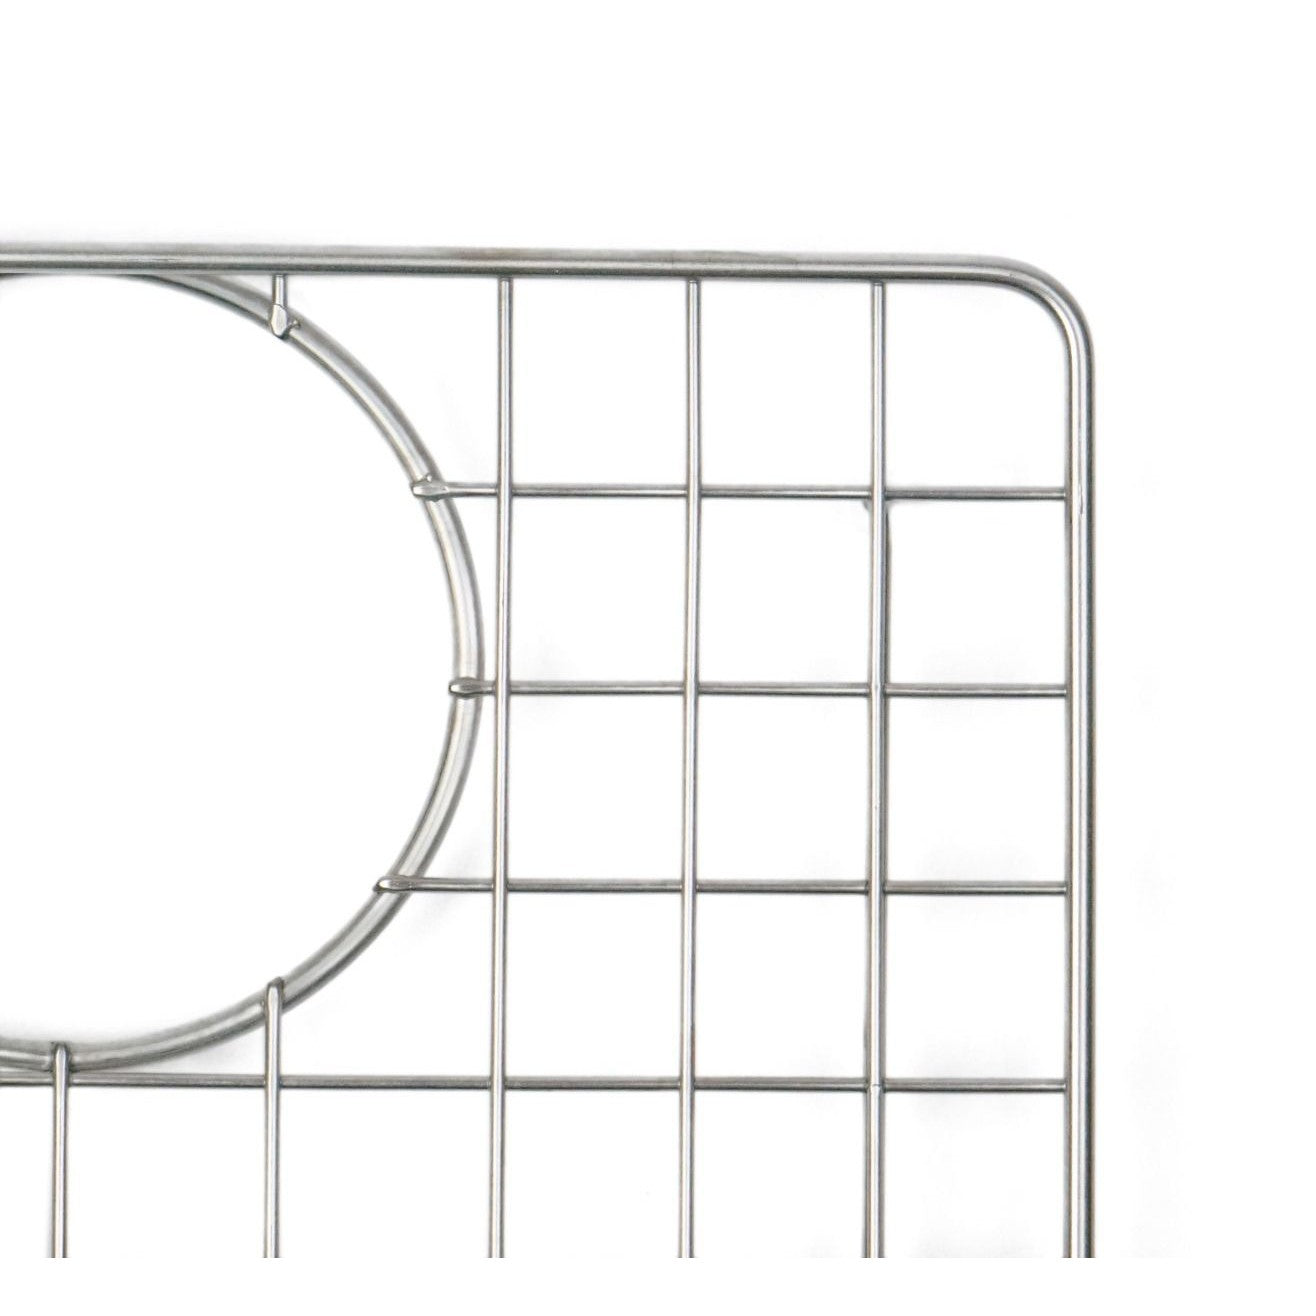 ALFI Brand ABGR3420 Stainless Steel Grid for AB3420DI and AB3420UM